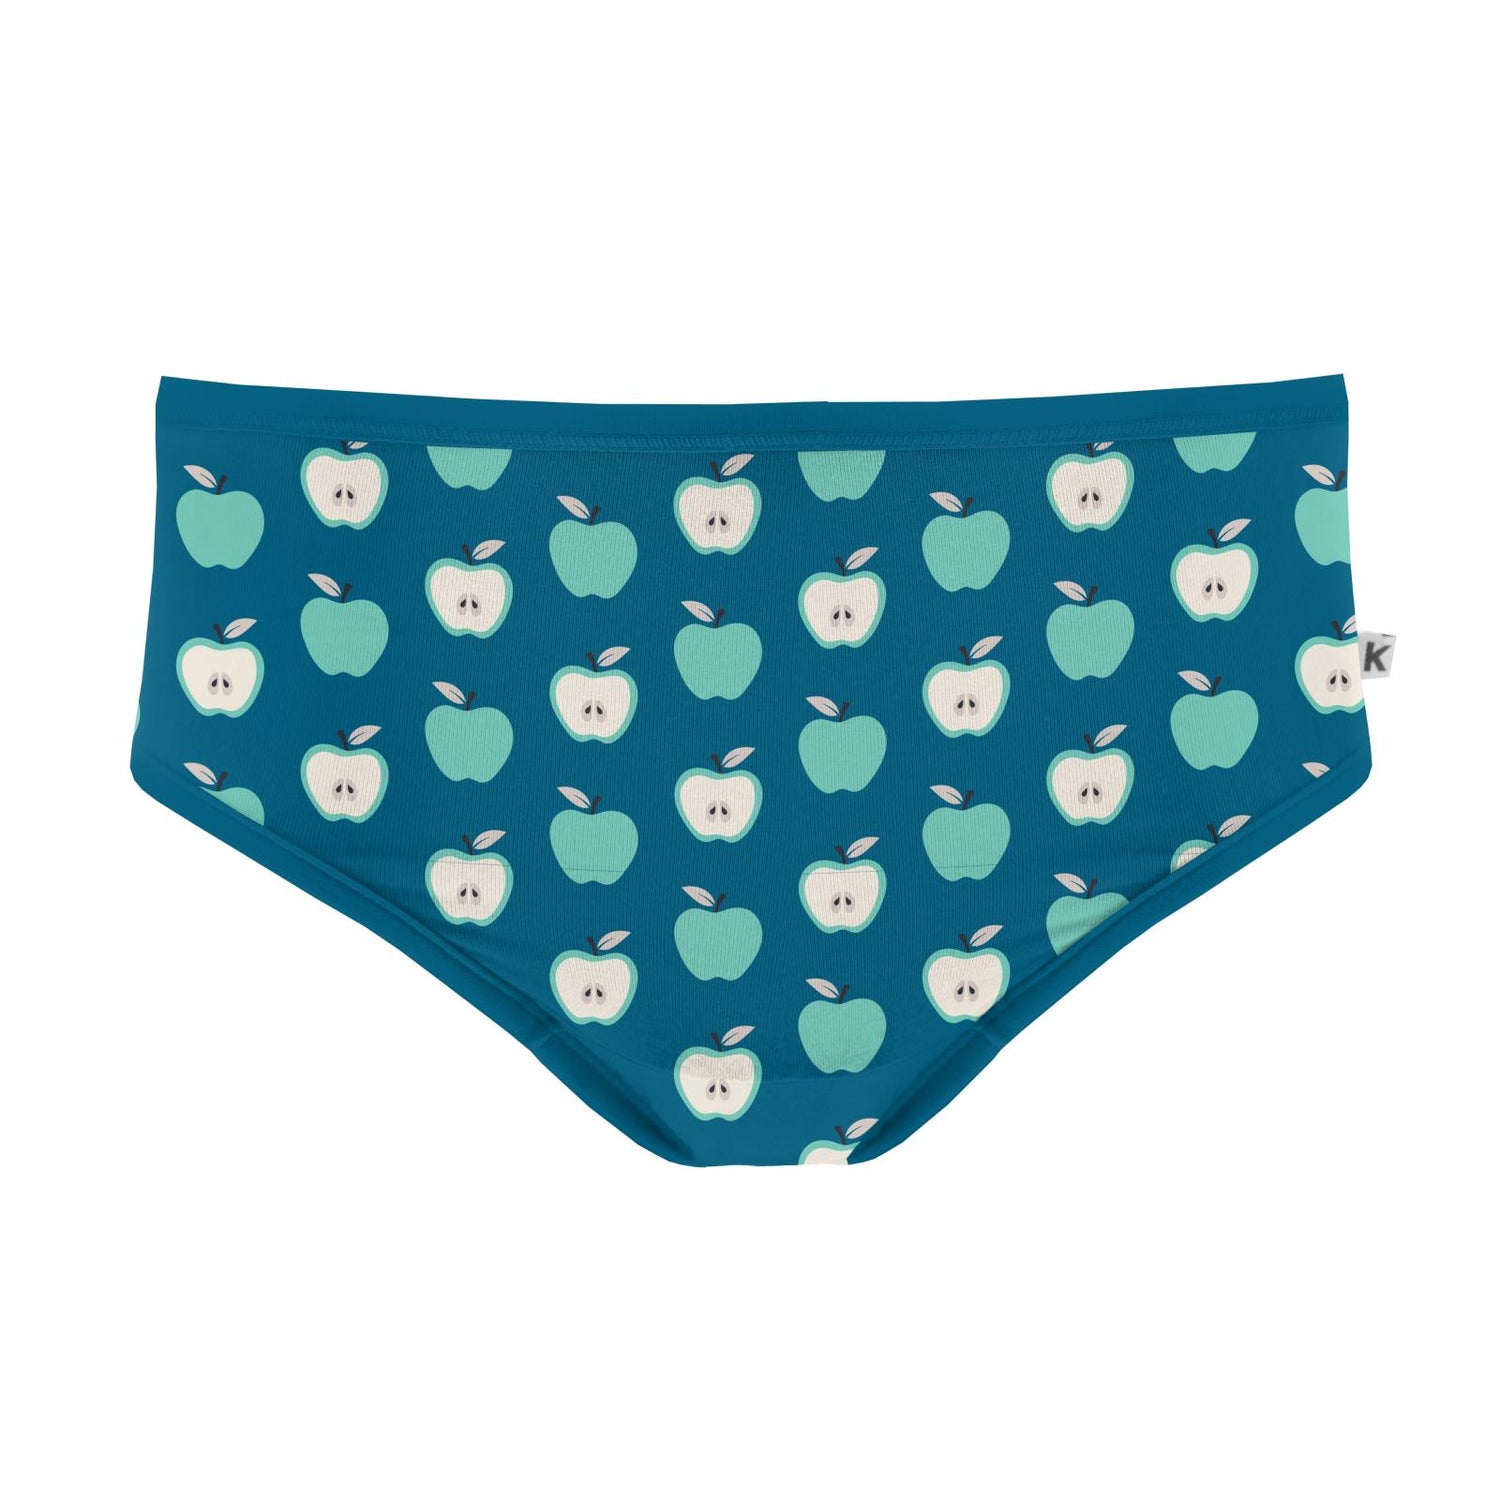 Women's Print Classic Brief in Seaport Johnny Appleseed